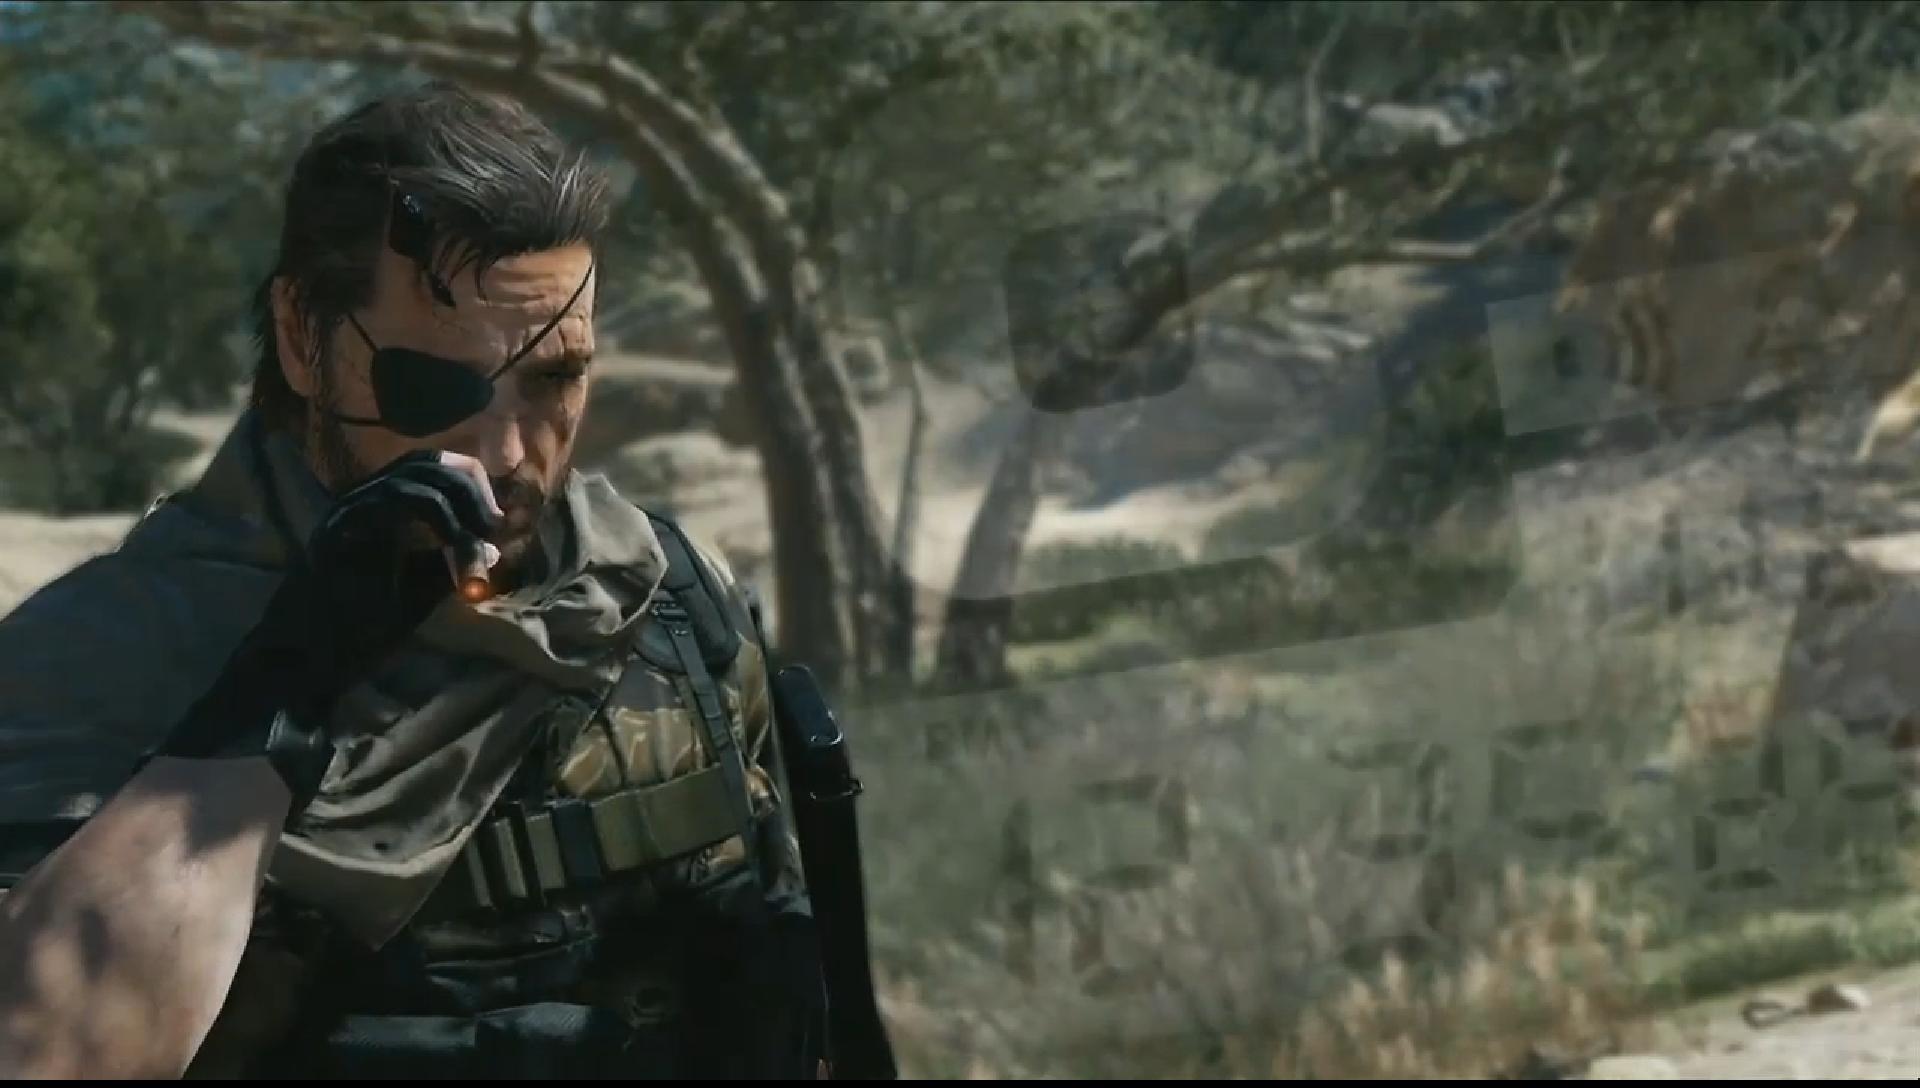 In-Depth at E3: Metal Gear Solid V: The Phantom Pain